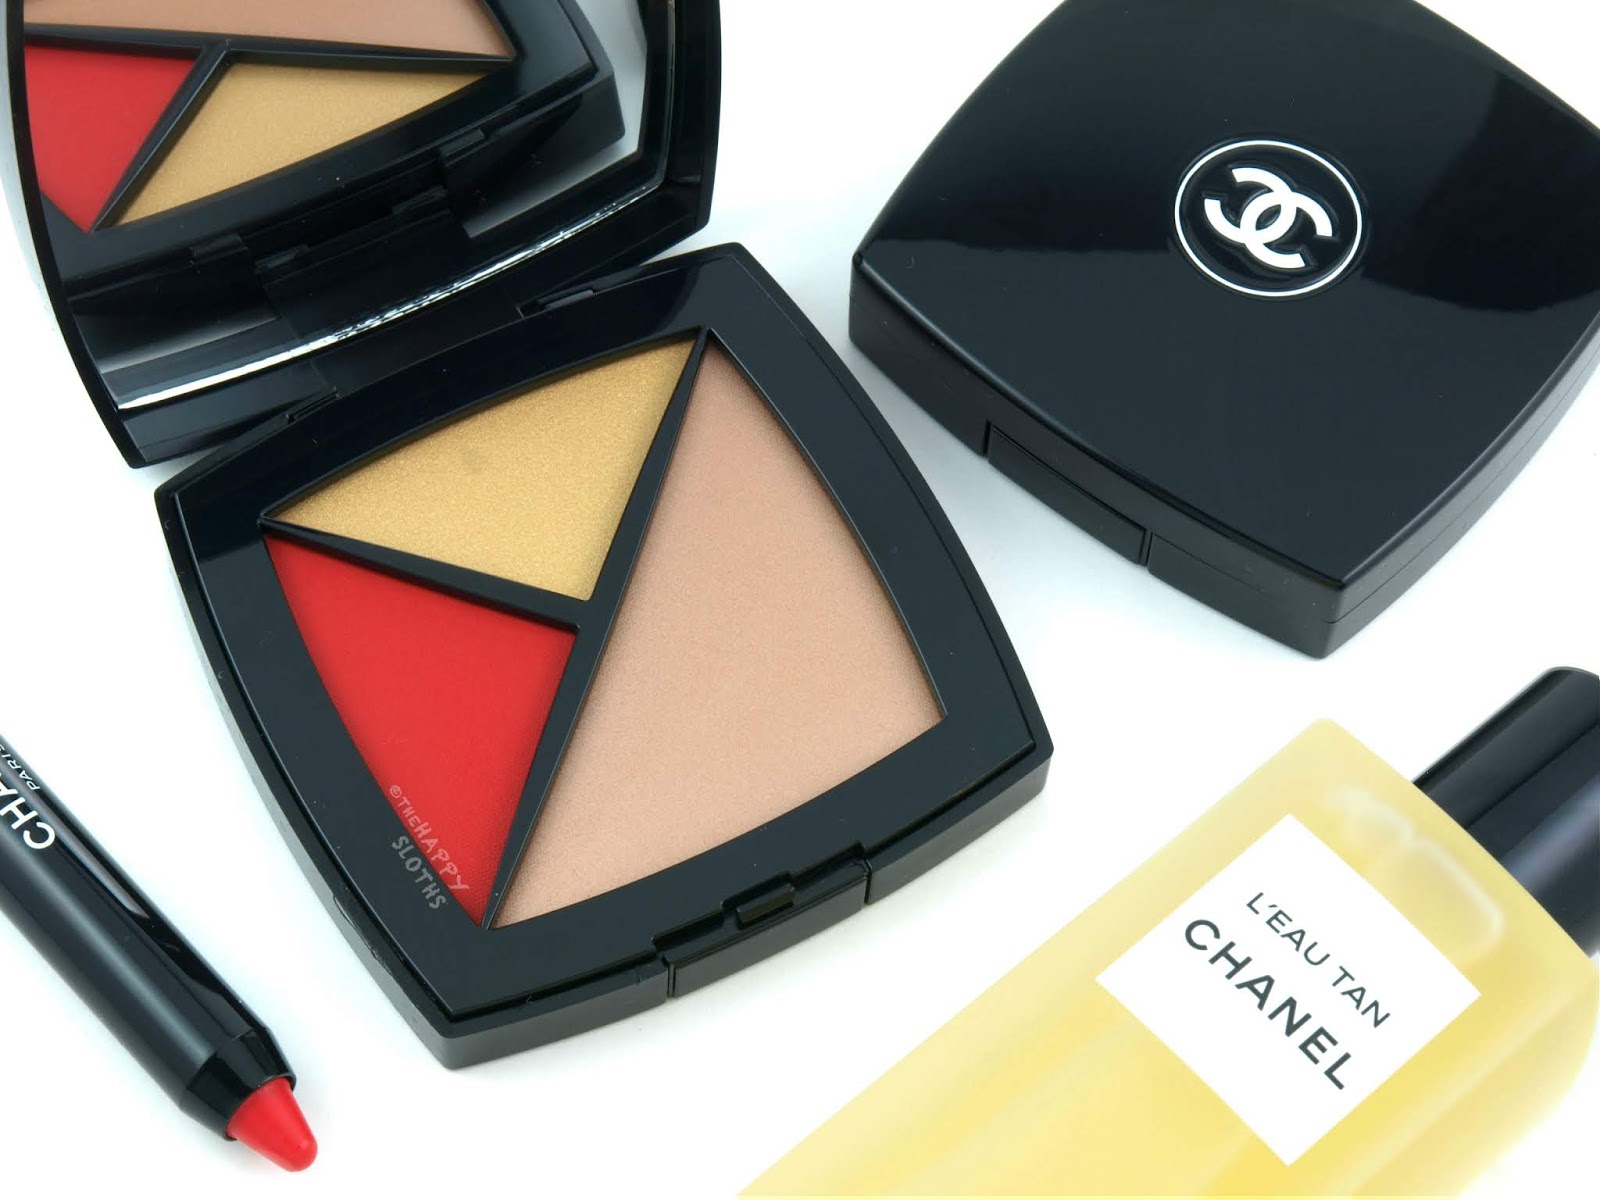 Chanel | Cruise 2018 Collection: Review and Swatches | The Happy Sloths: Skincare Blog with Reviews and Swatches